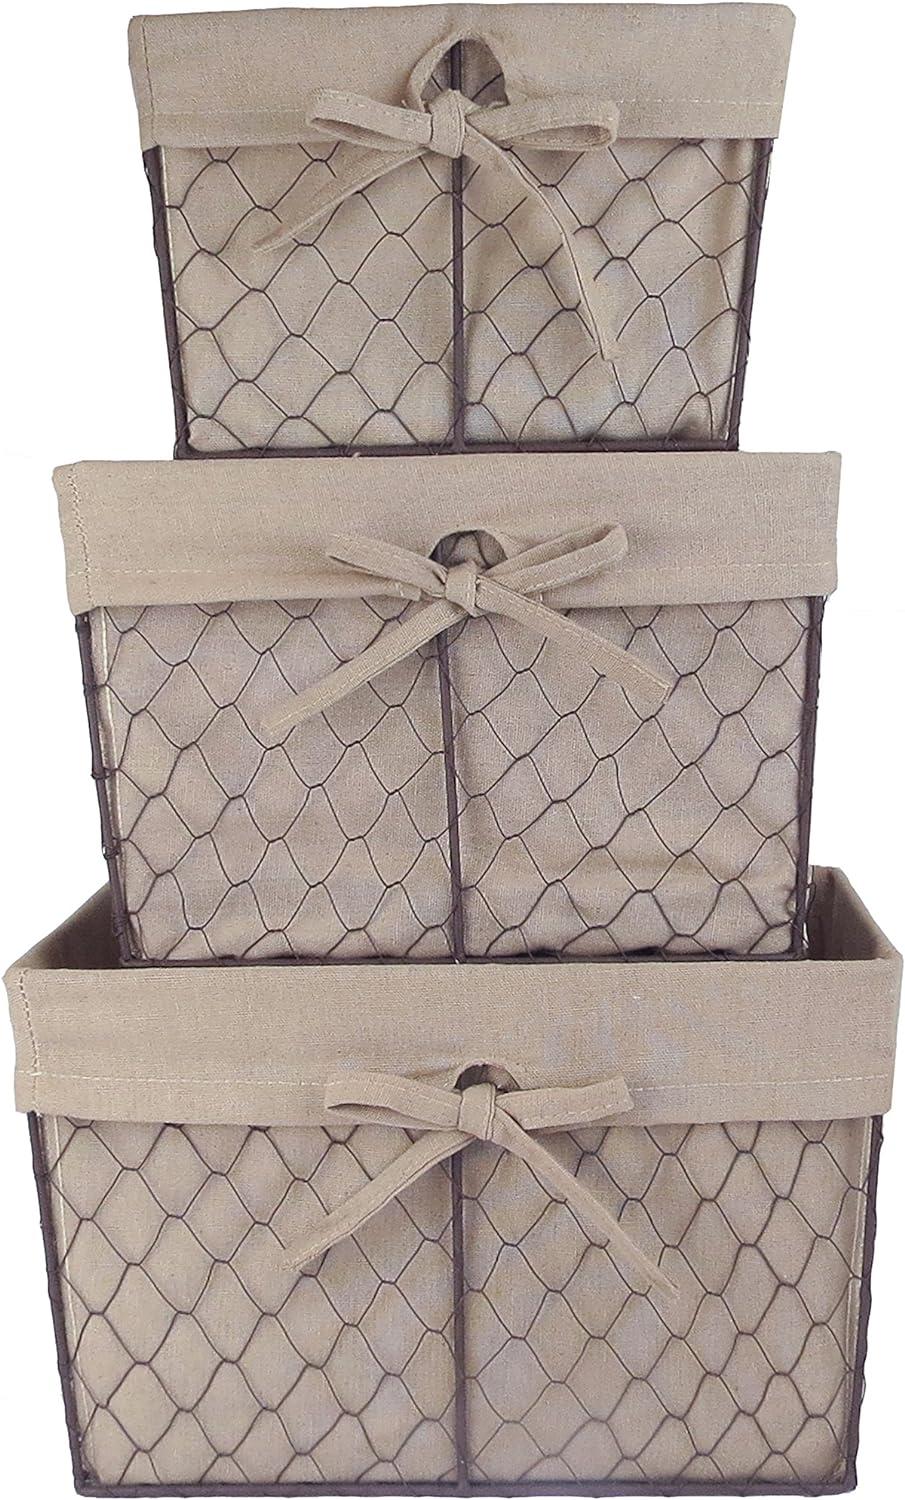 Rustic Country Rectangular Wire Basket Set with Beige Liners, Set of 3